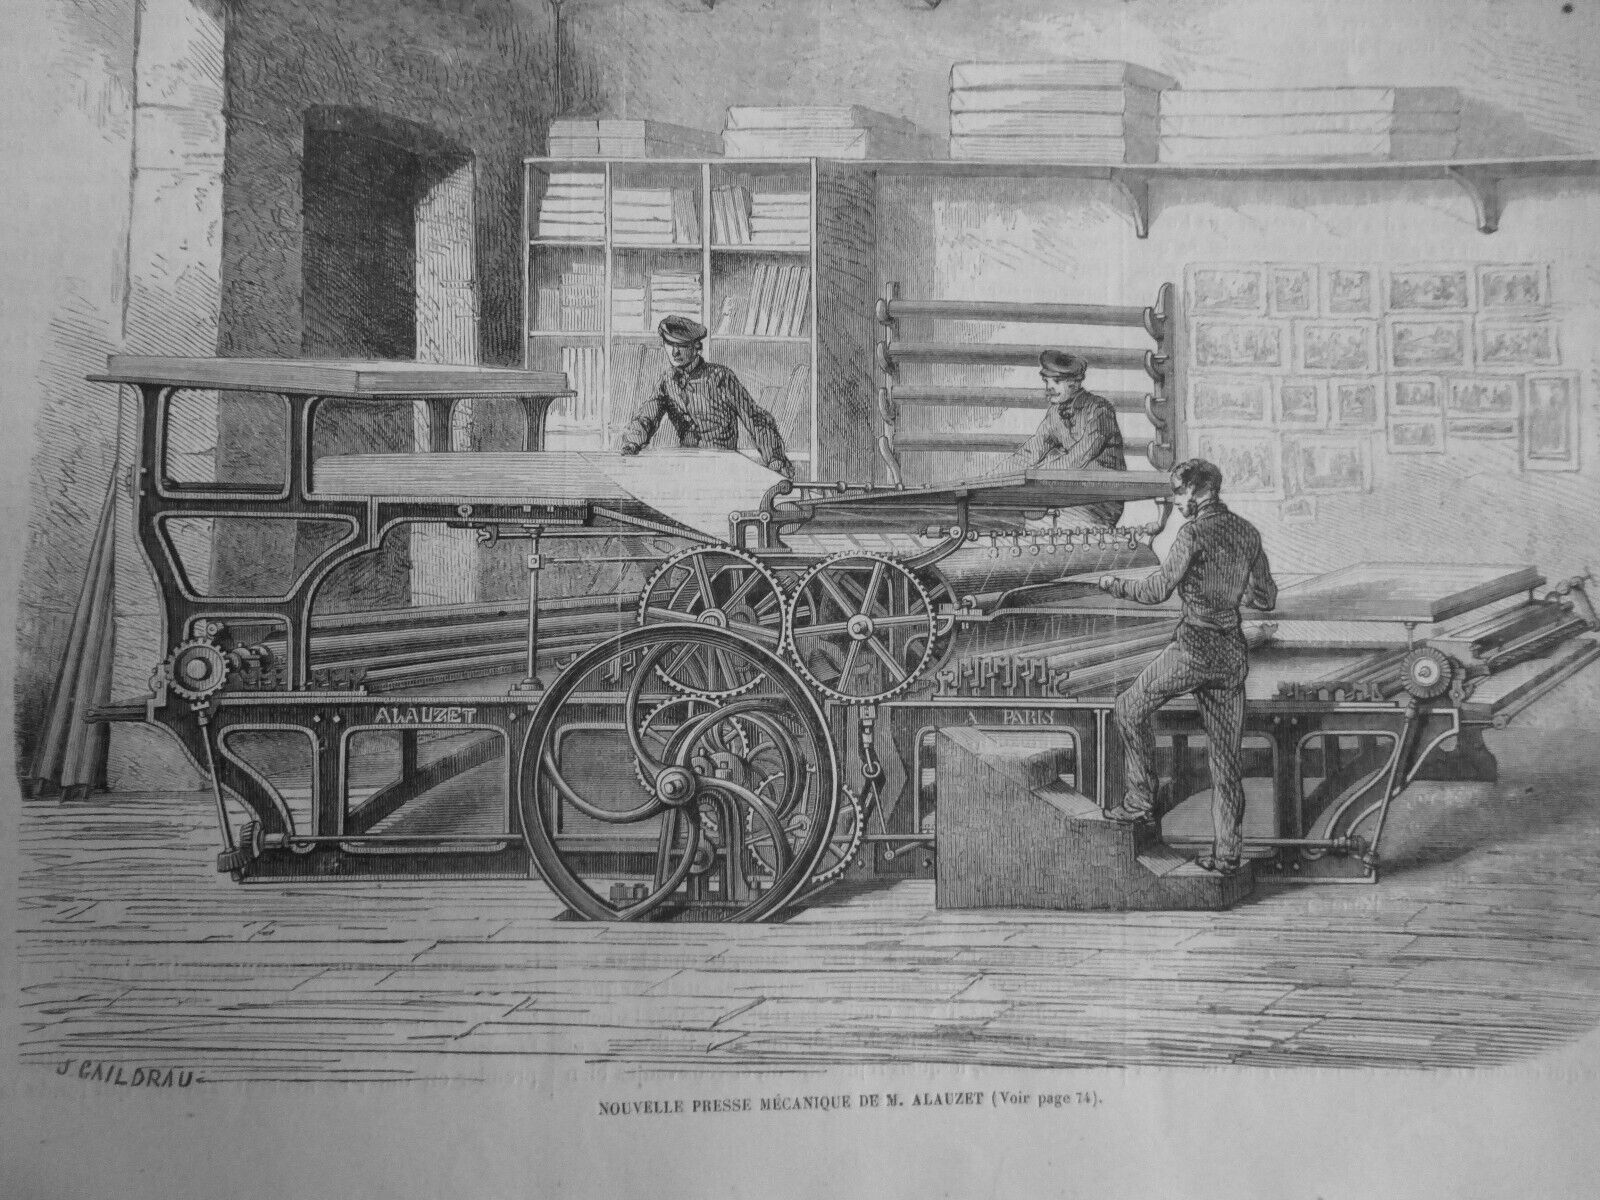 1851 MECHANICAL PRESS PAPERMAKING 2 ANTIQUE NEWSPAPERS